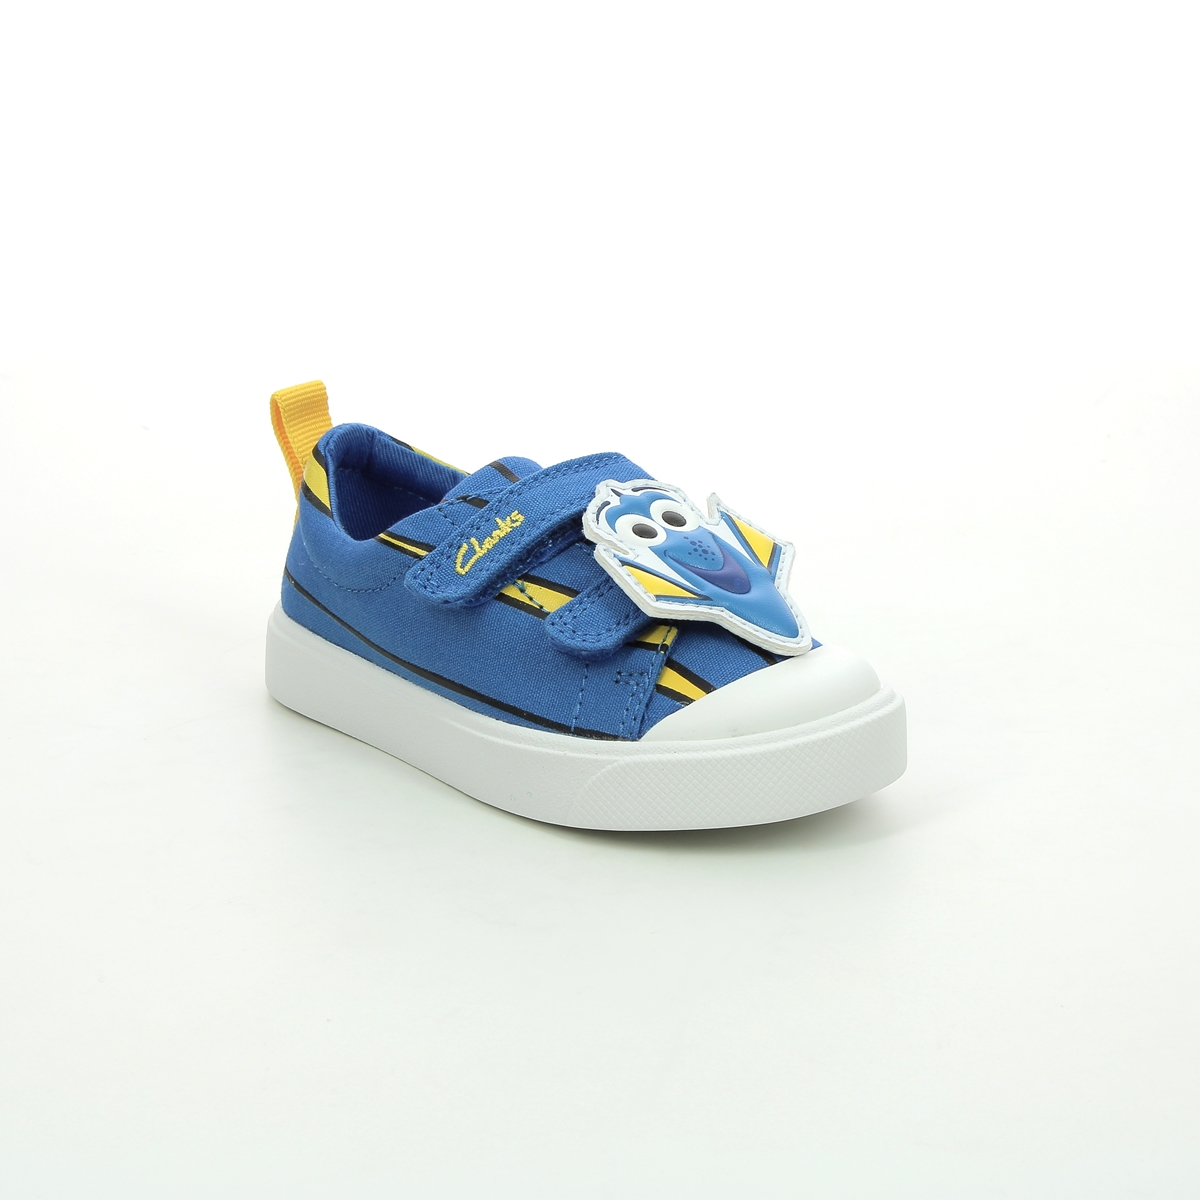 Clarks City Nemo T Blue Kids Toddler Boys Trainers 5766-17G in a Plain Canvas in Size 4.5